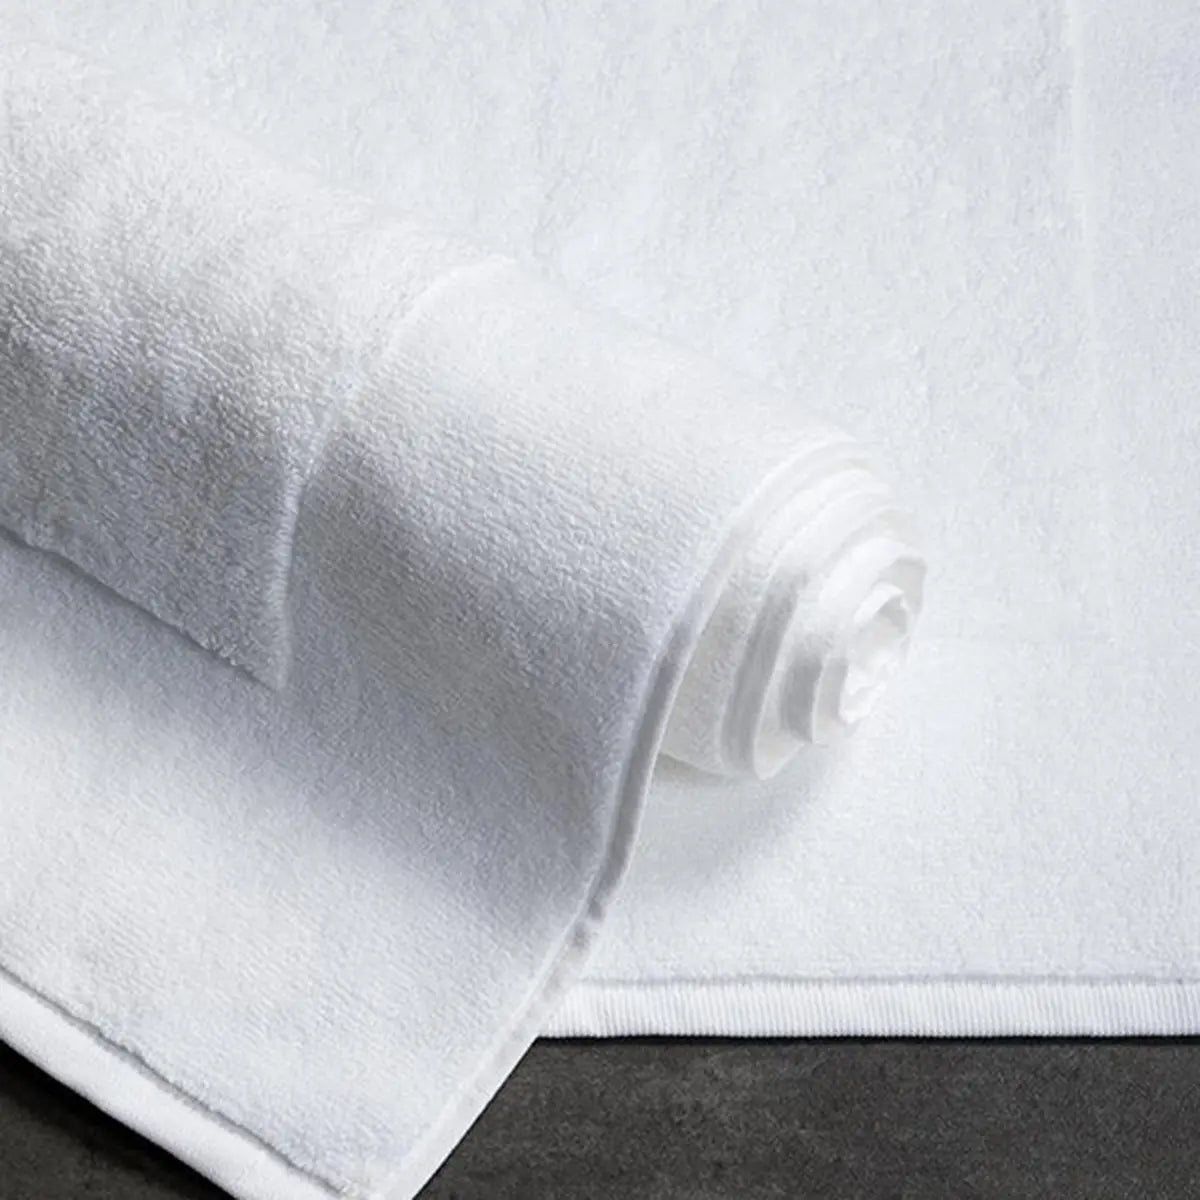 Sferra Bello Tub Mat in White, rolled up on the floor